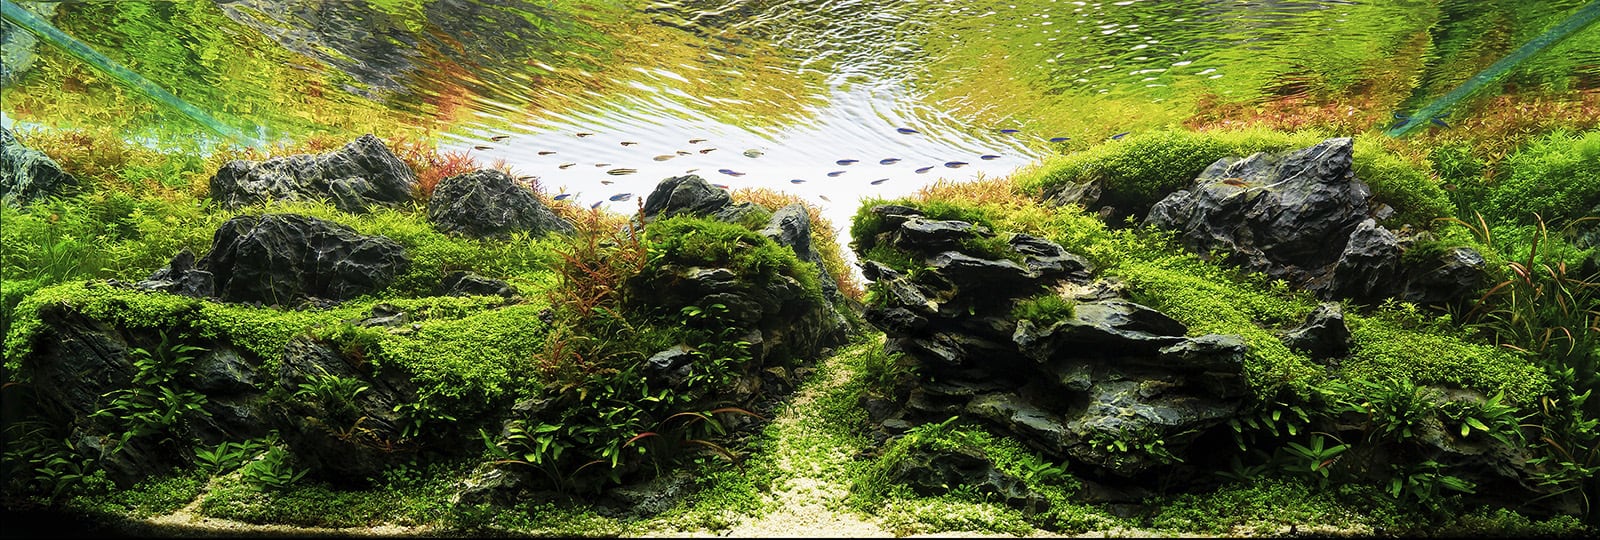 How To Win an Aquascaping Contest - Aquascaping Love